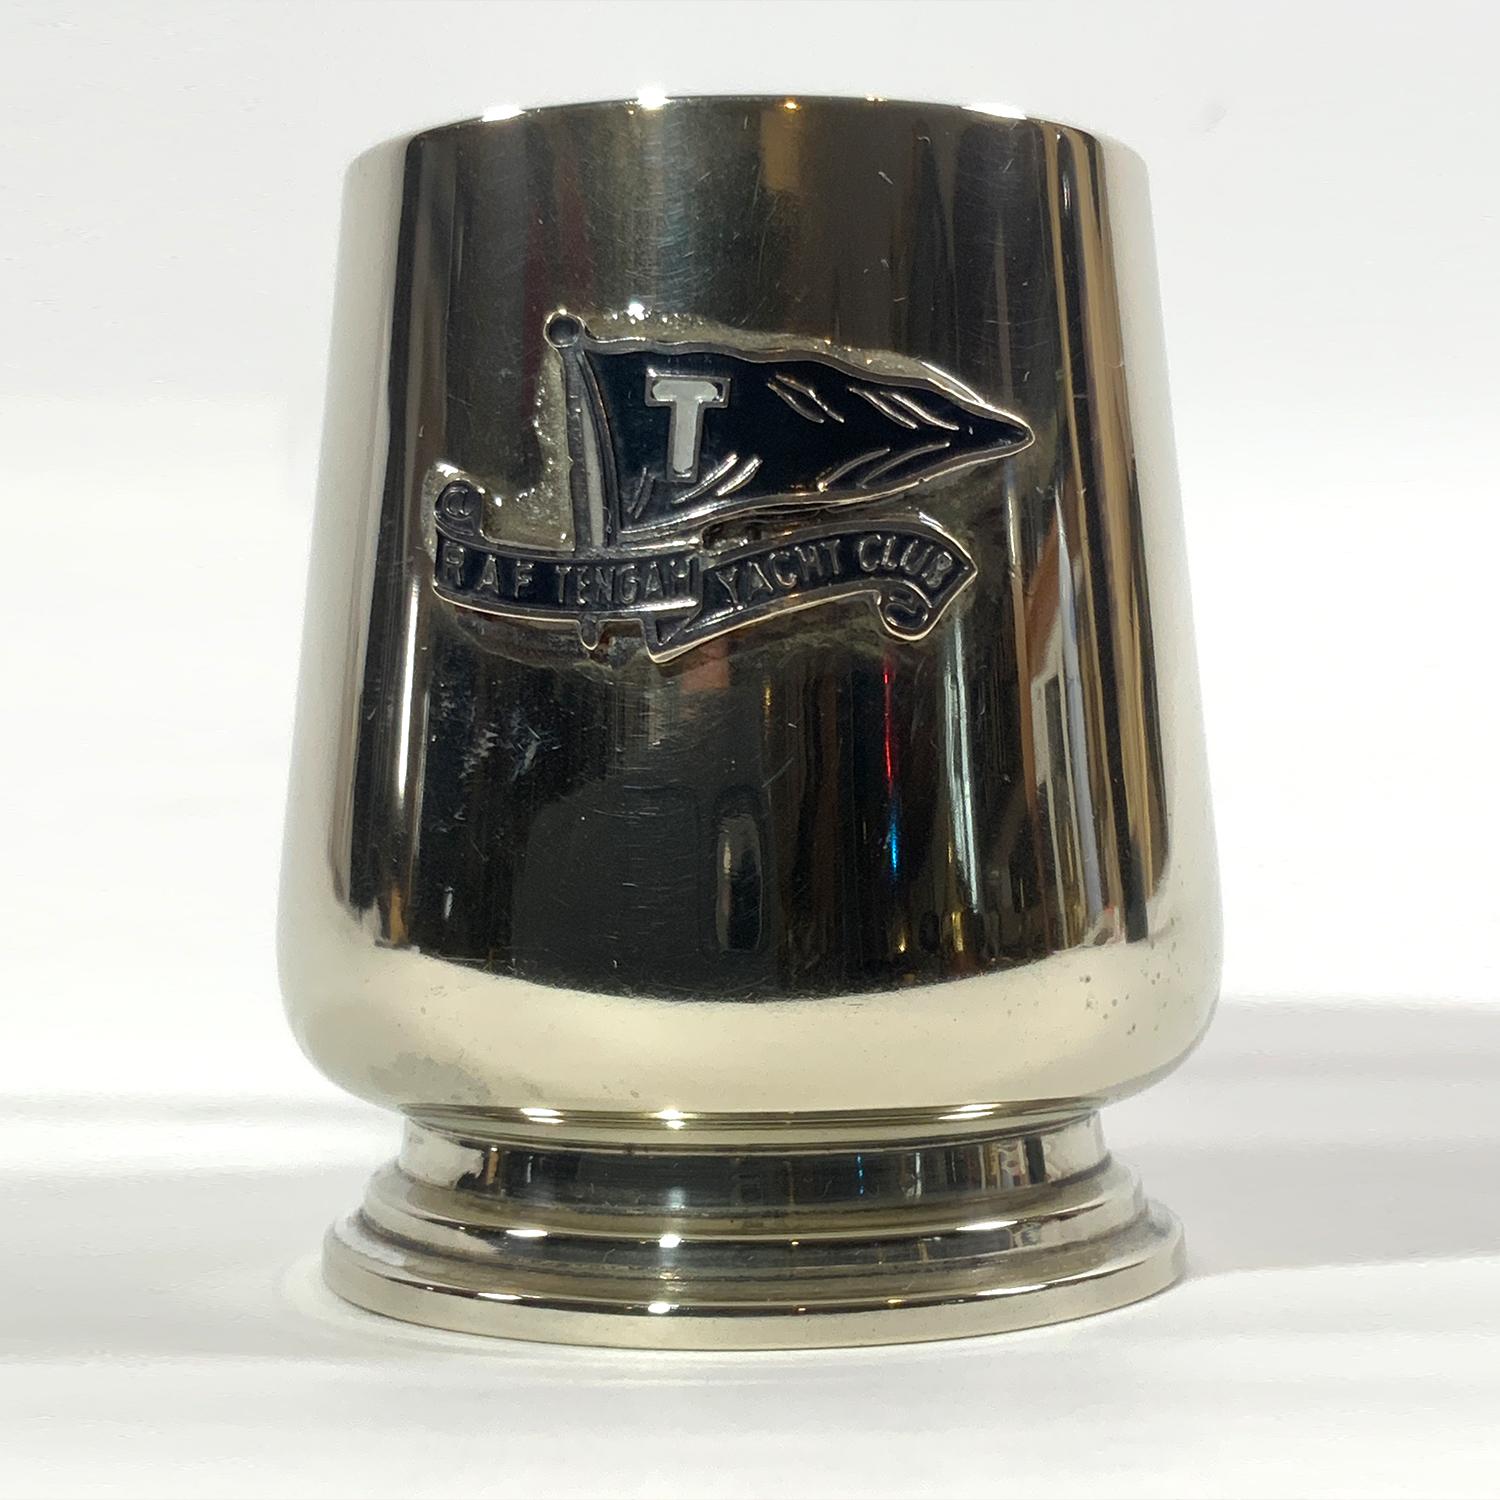 Cloisonne badge silver soldered drinking or toasting cup from the RAF Tengah Yacht Club. Circa 1950.